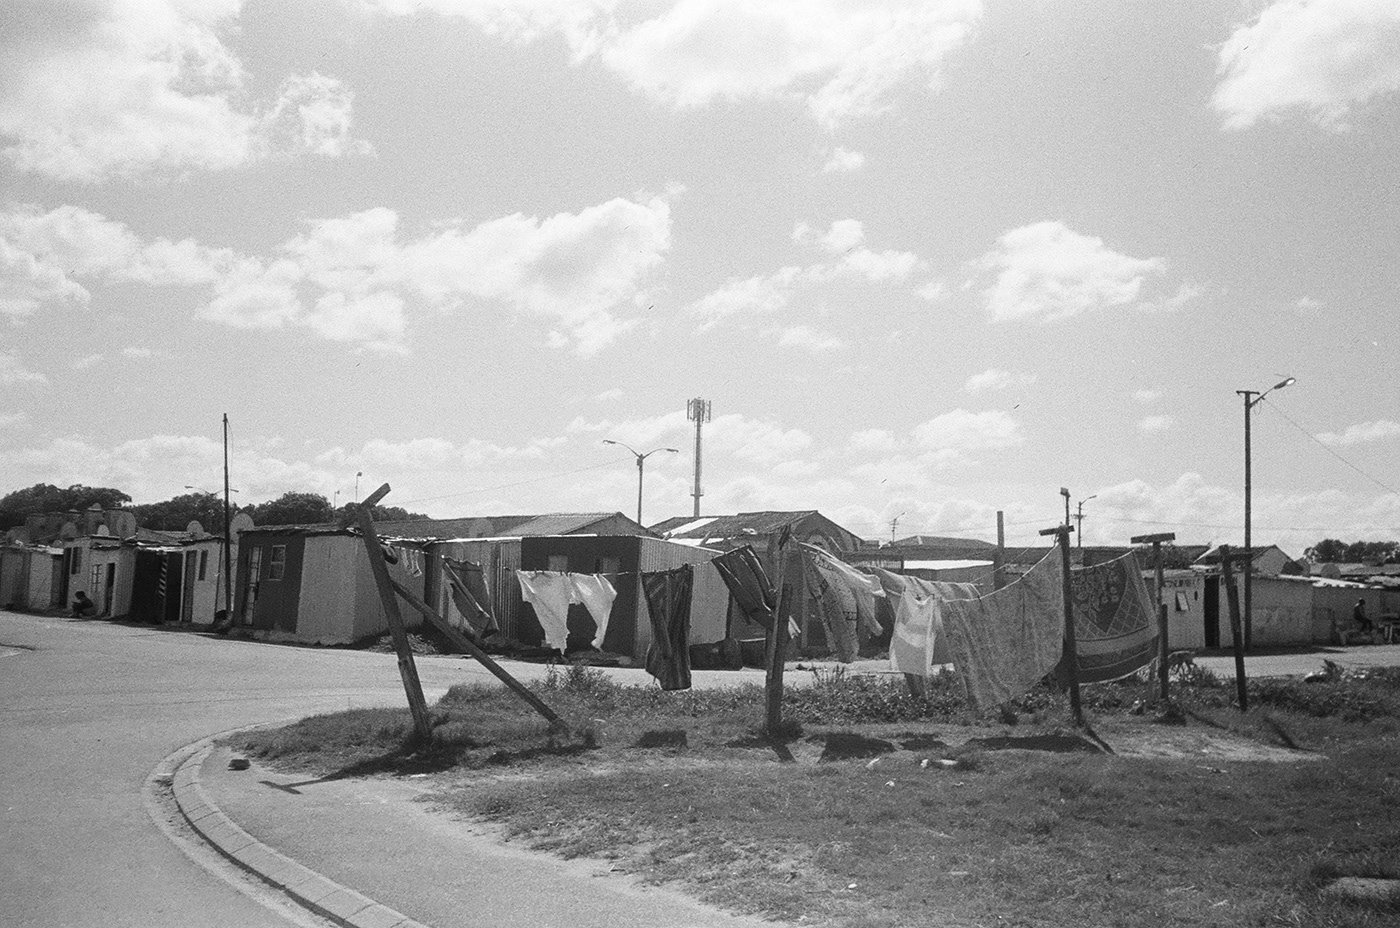 #PROTESTMUSIC AndyMkosi   black and white FilmPhotography Landscape Langa Outdoor southafrica